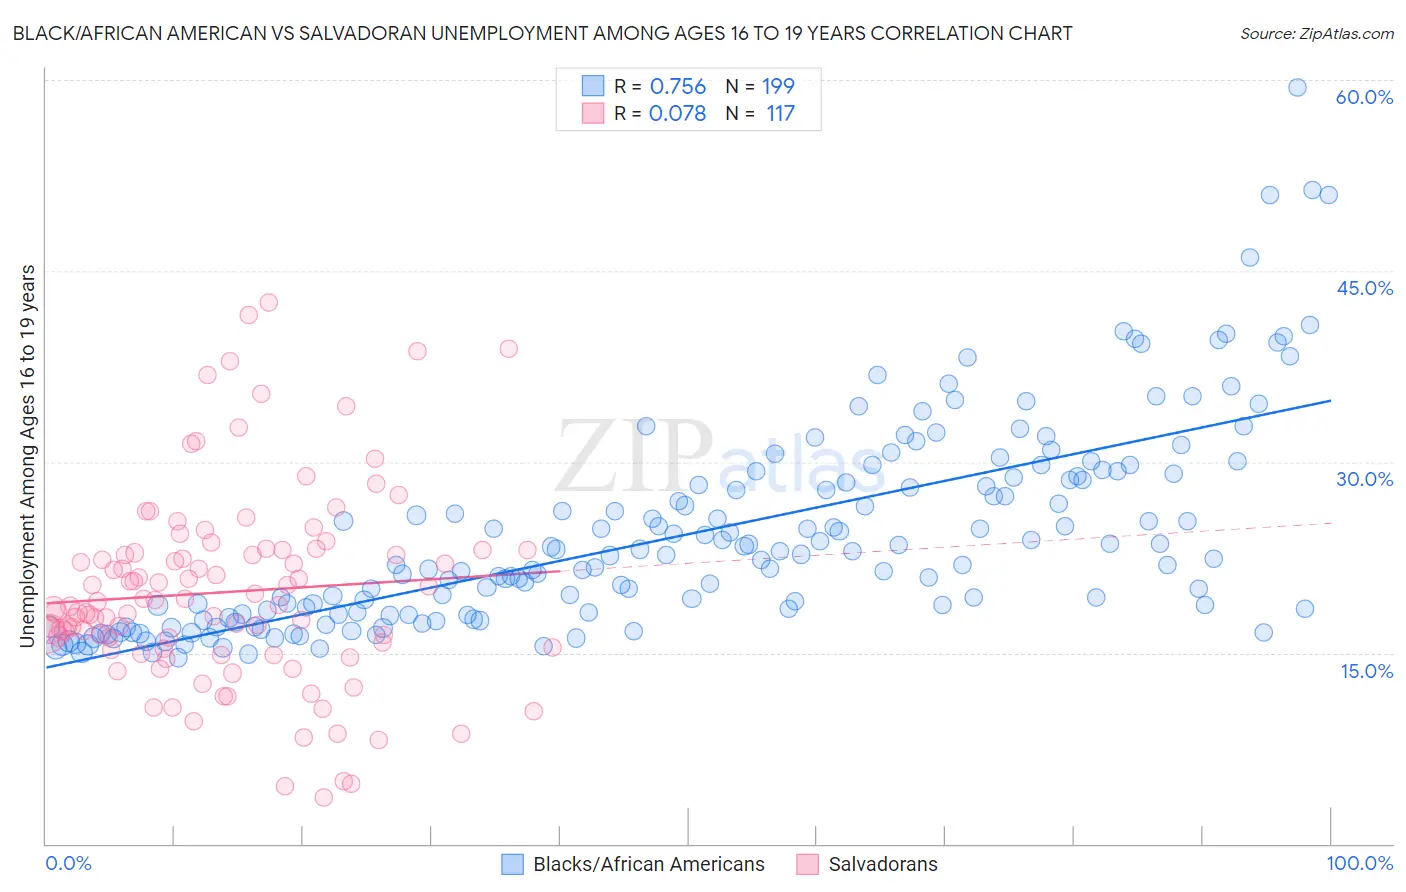 Black/African American vs Salvadoran Unemployment Among Ages 16 to 19 years